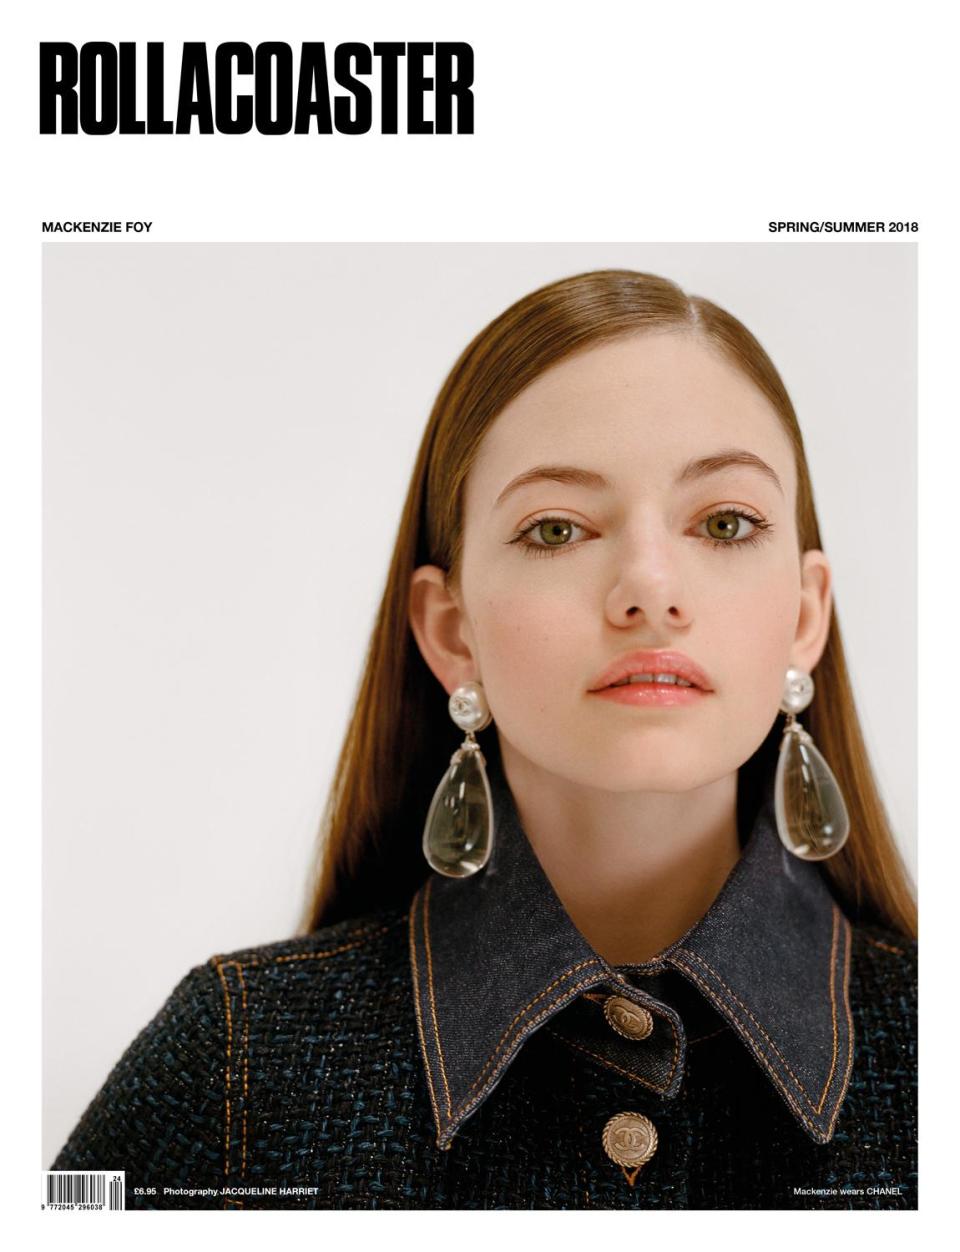 Read the full interview with Mackenzie Foy in Rollacoaster magazine (Rollacoaster magazine)